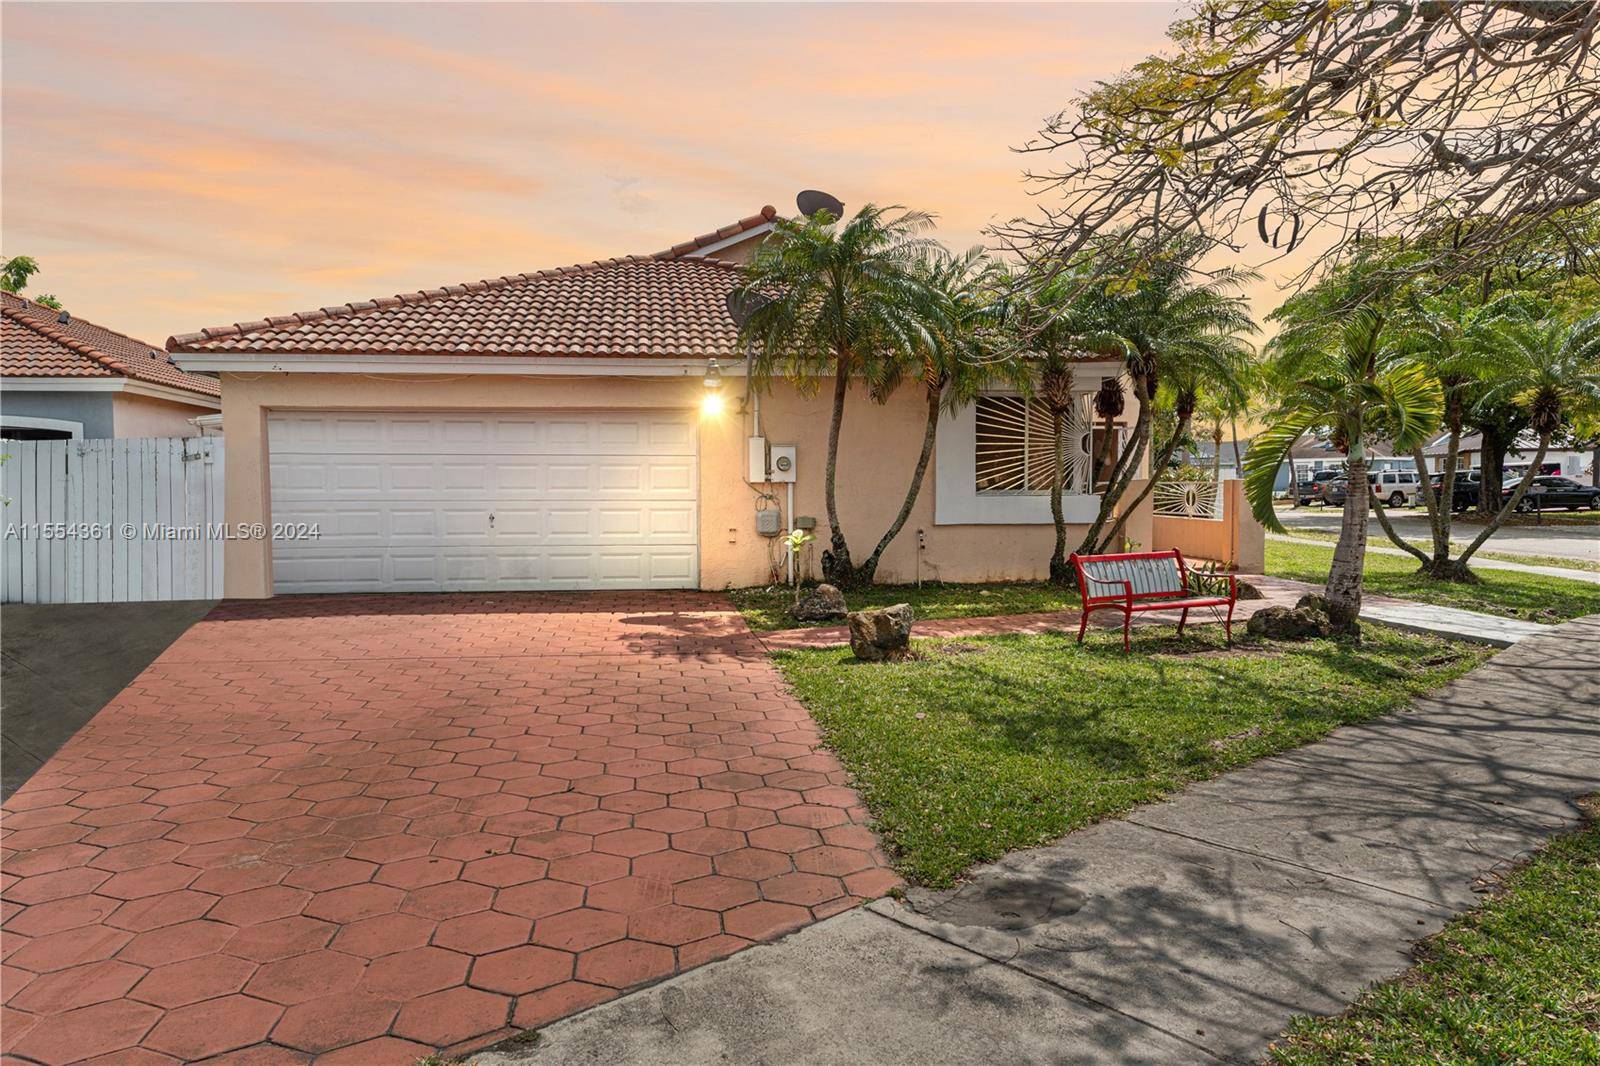 Welcome to 11450 SW 185th St, Miami, FL 33157.